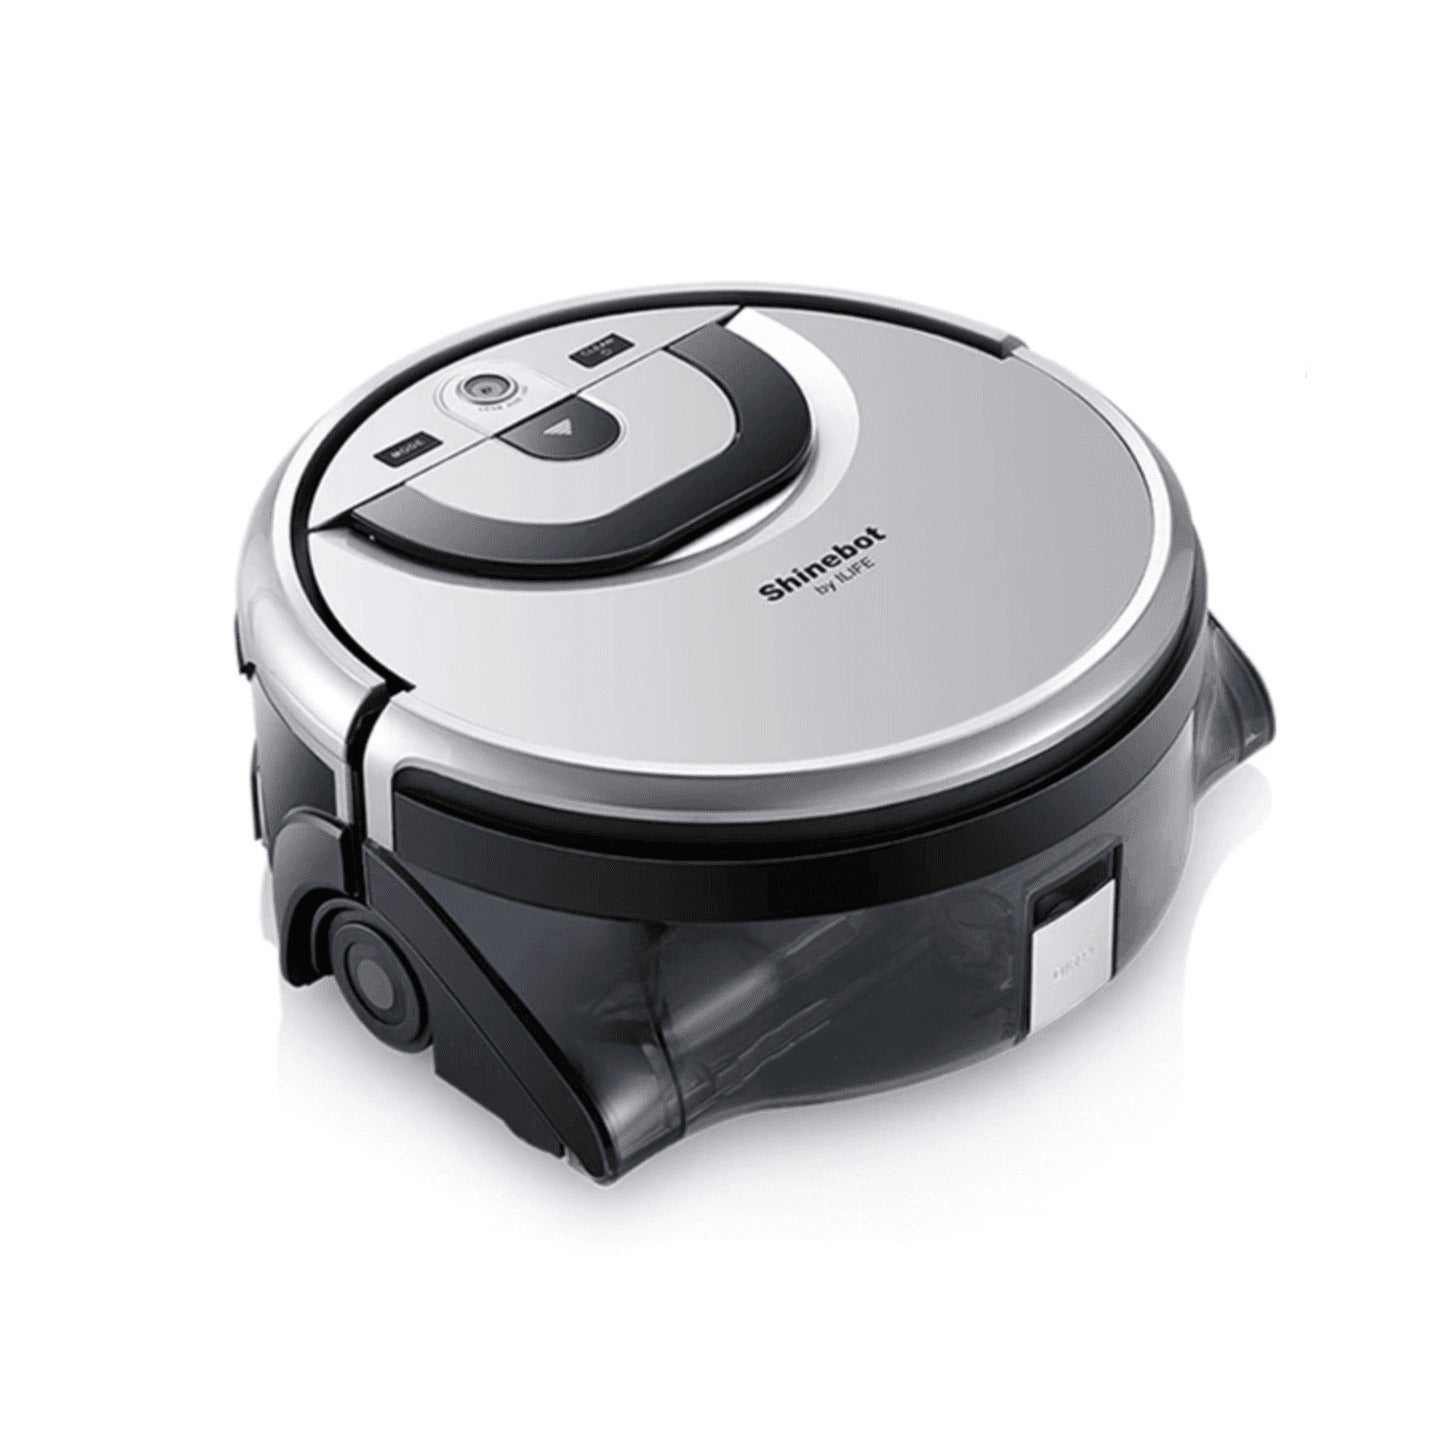 ILIFE W455 Shinebot Gyroscope Robot: Smart and Stylish Cleaner with Advanced Features